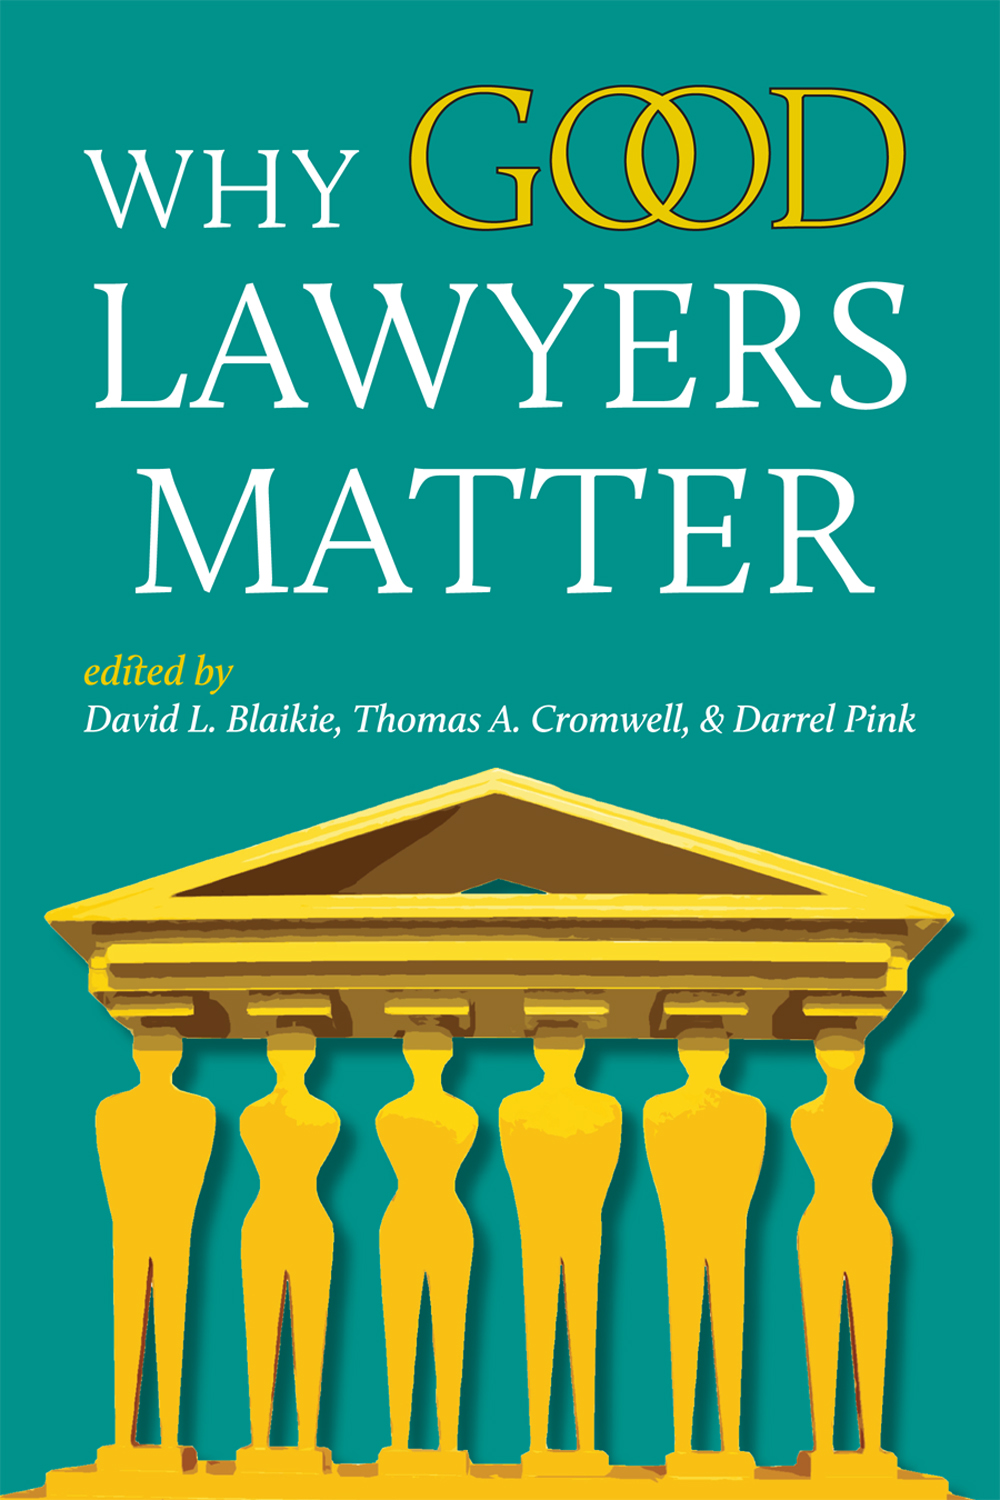 Why Good Lawyers Matter